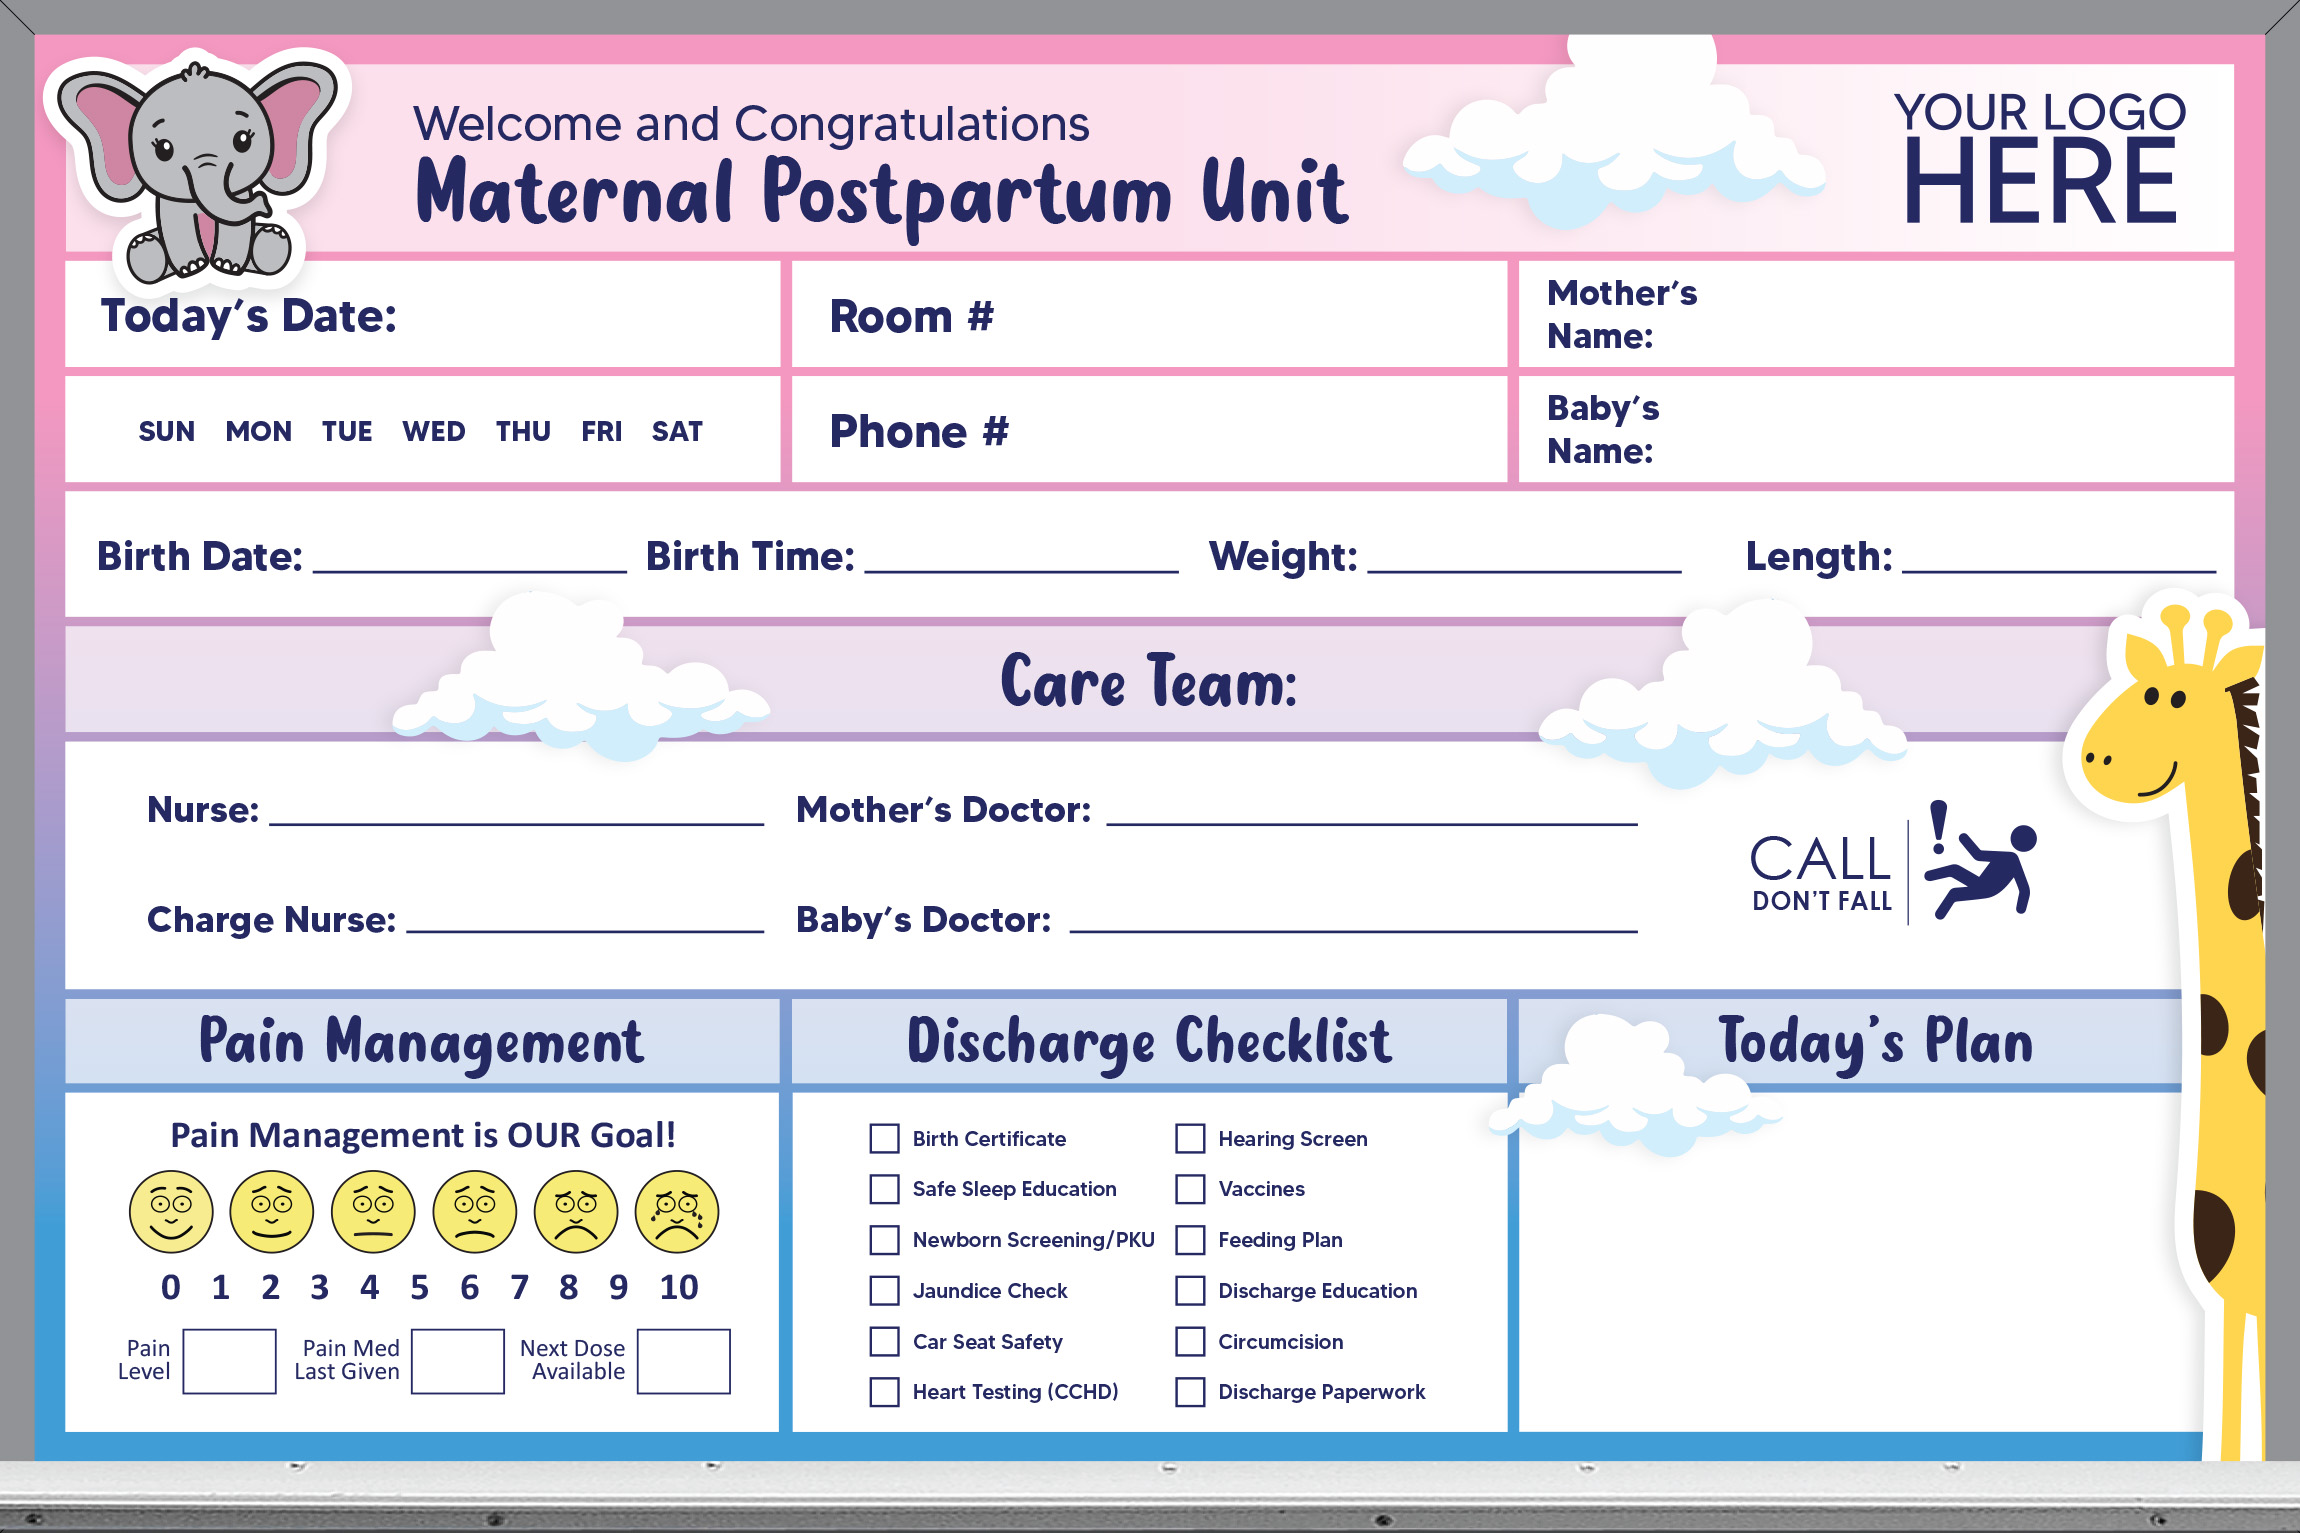 2x3 maternity room whiteboard - pre-printed, pink and blue background, add your logo